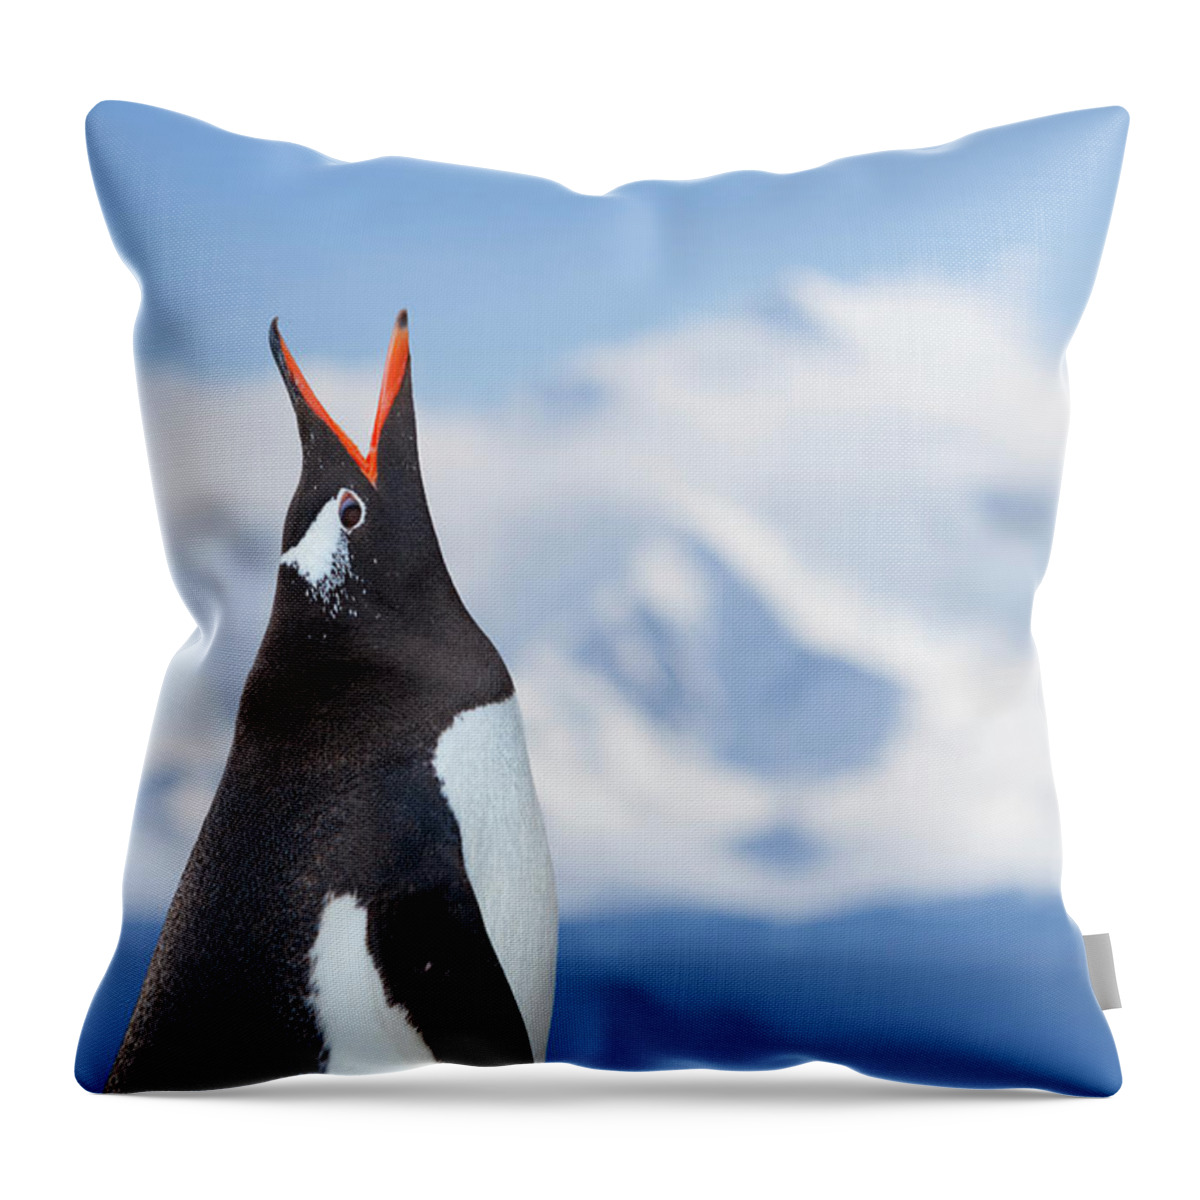 Scenics Throw Pillow featuring the photograph Antarctica Gentoo Penguin Shouting by Grafissimo